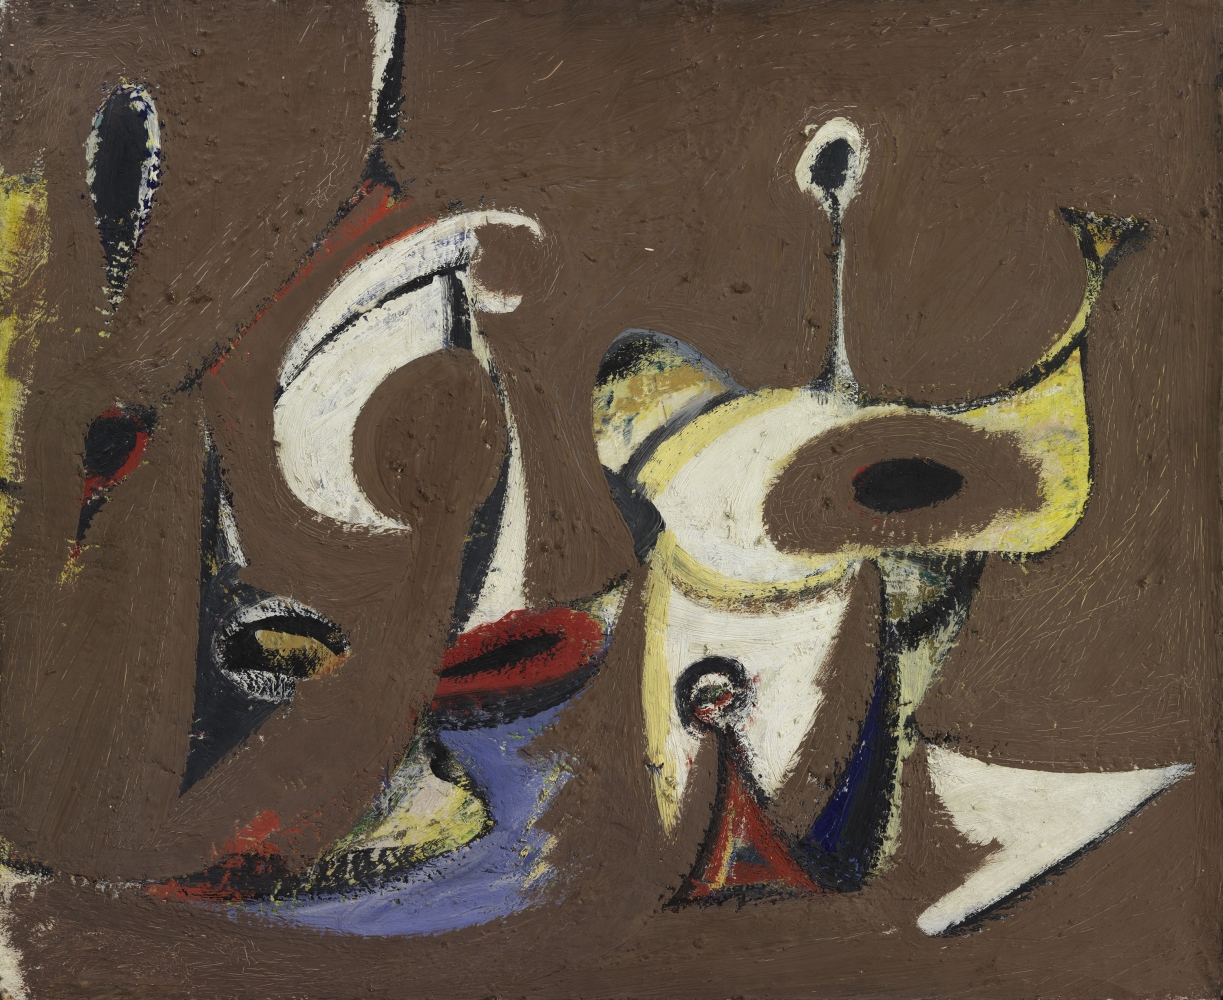 Painting, c. 1941&ndash;42, oil on canvas, 20 x 24 in. (50.8 x 61 cm). Private collection. [AGCR: P250]